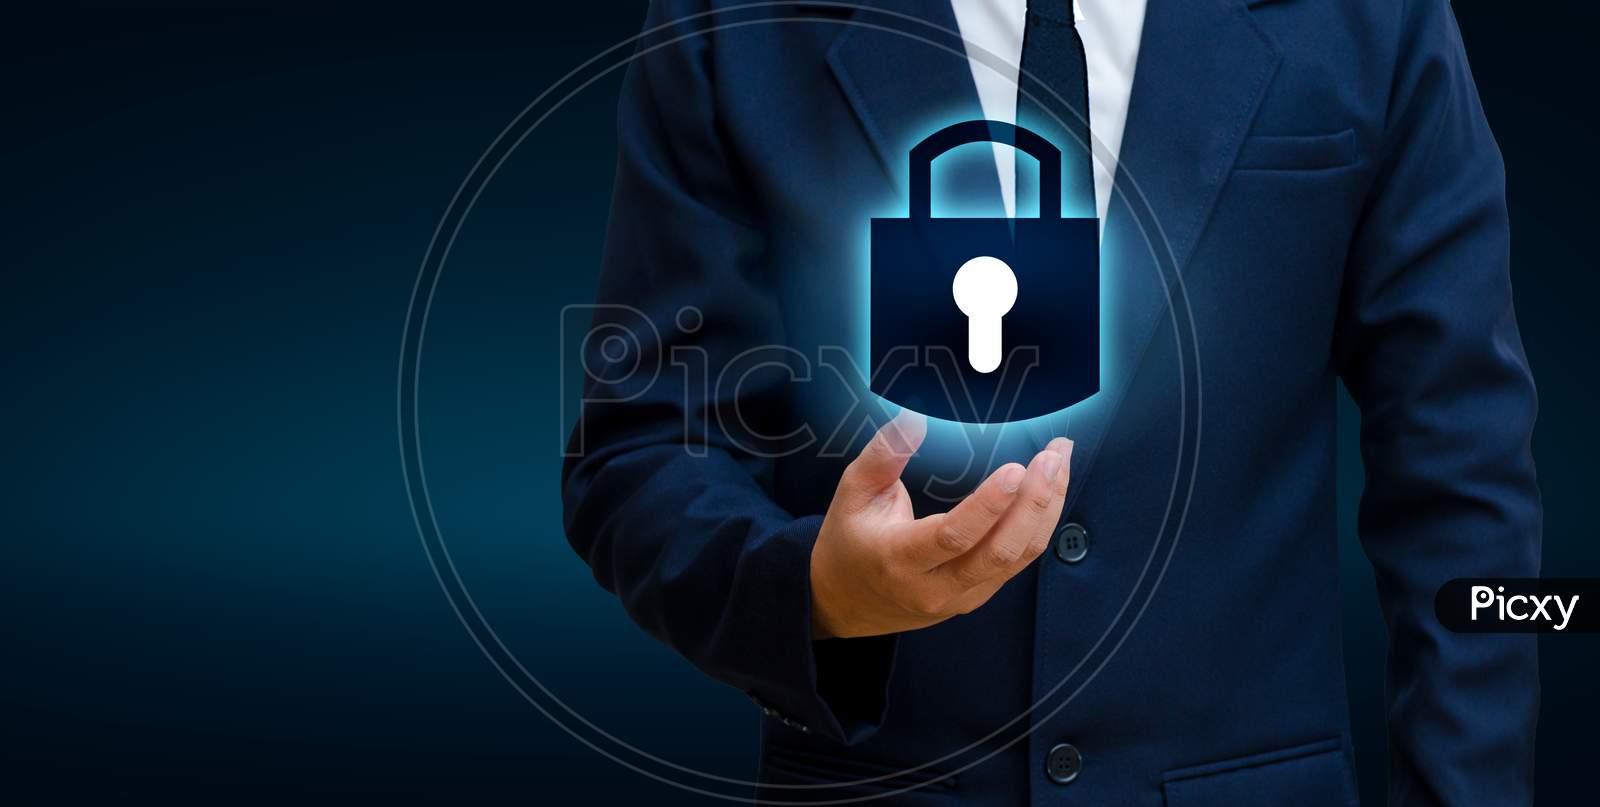 Lock In The Hands Of A Businessman Shield The Shield To Protect The Cyberspace.Space Input Data Data Security Business Internet Concept. Secure Information